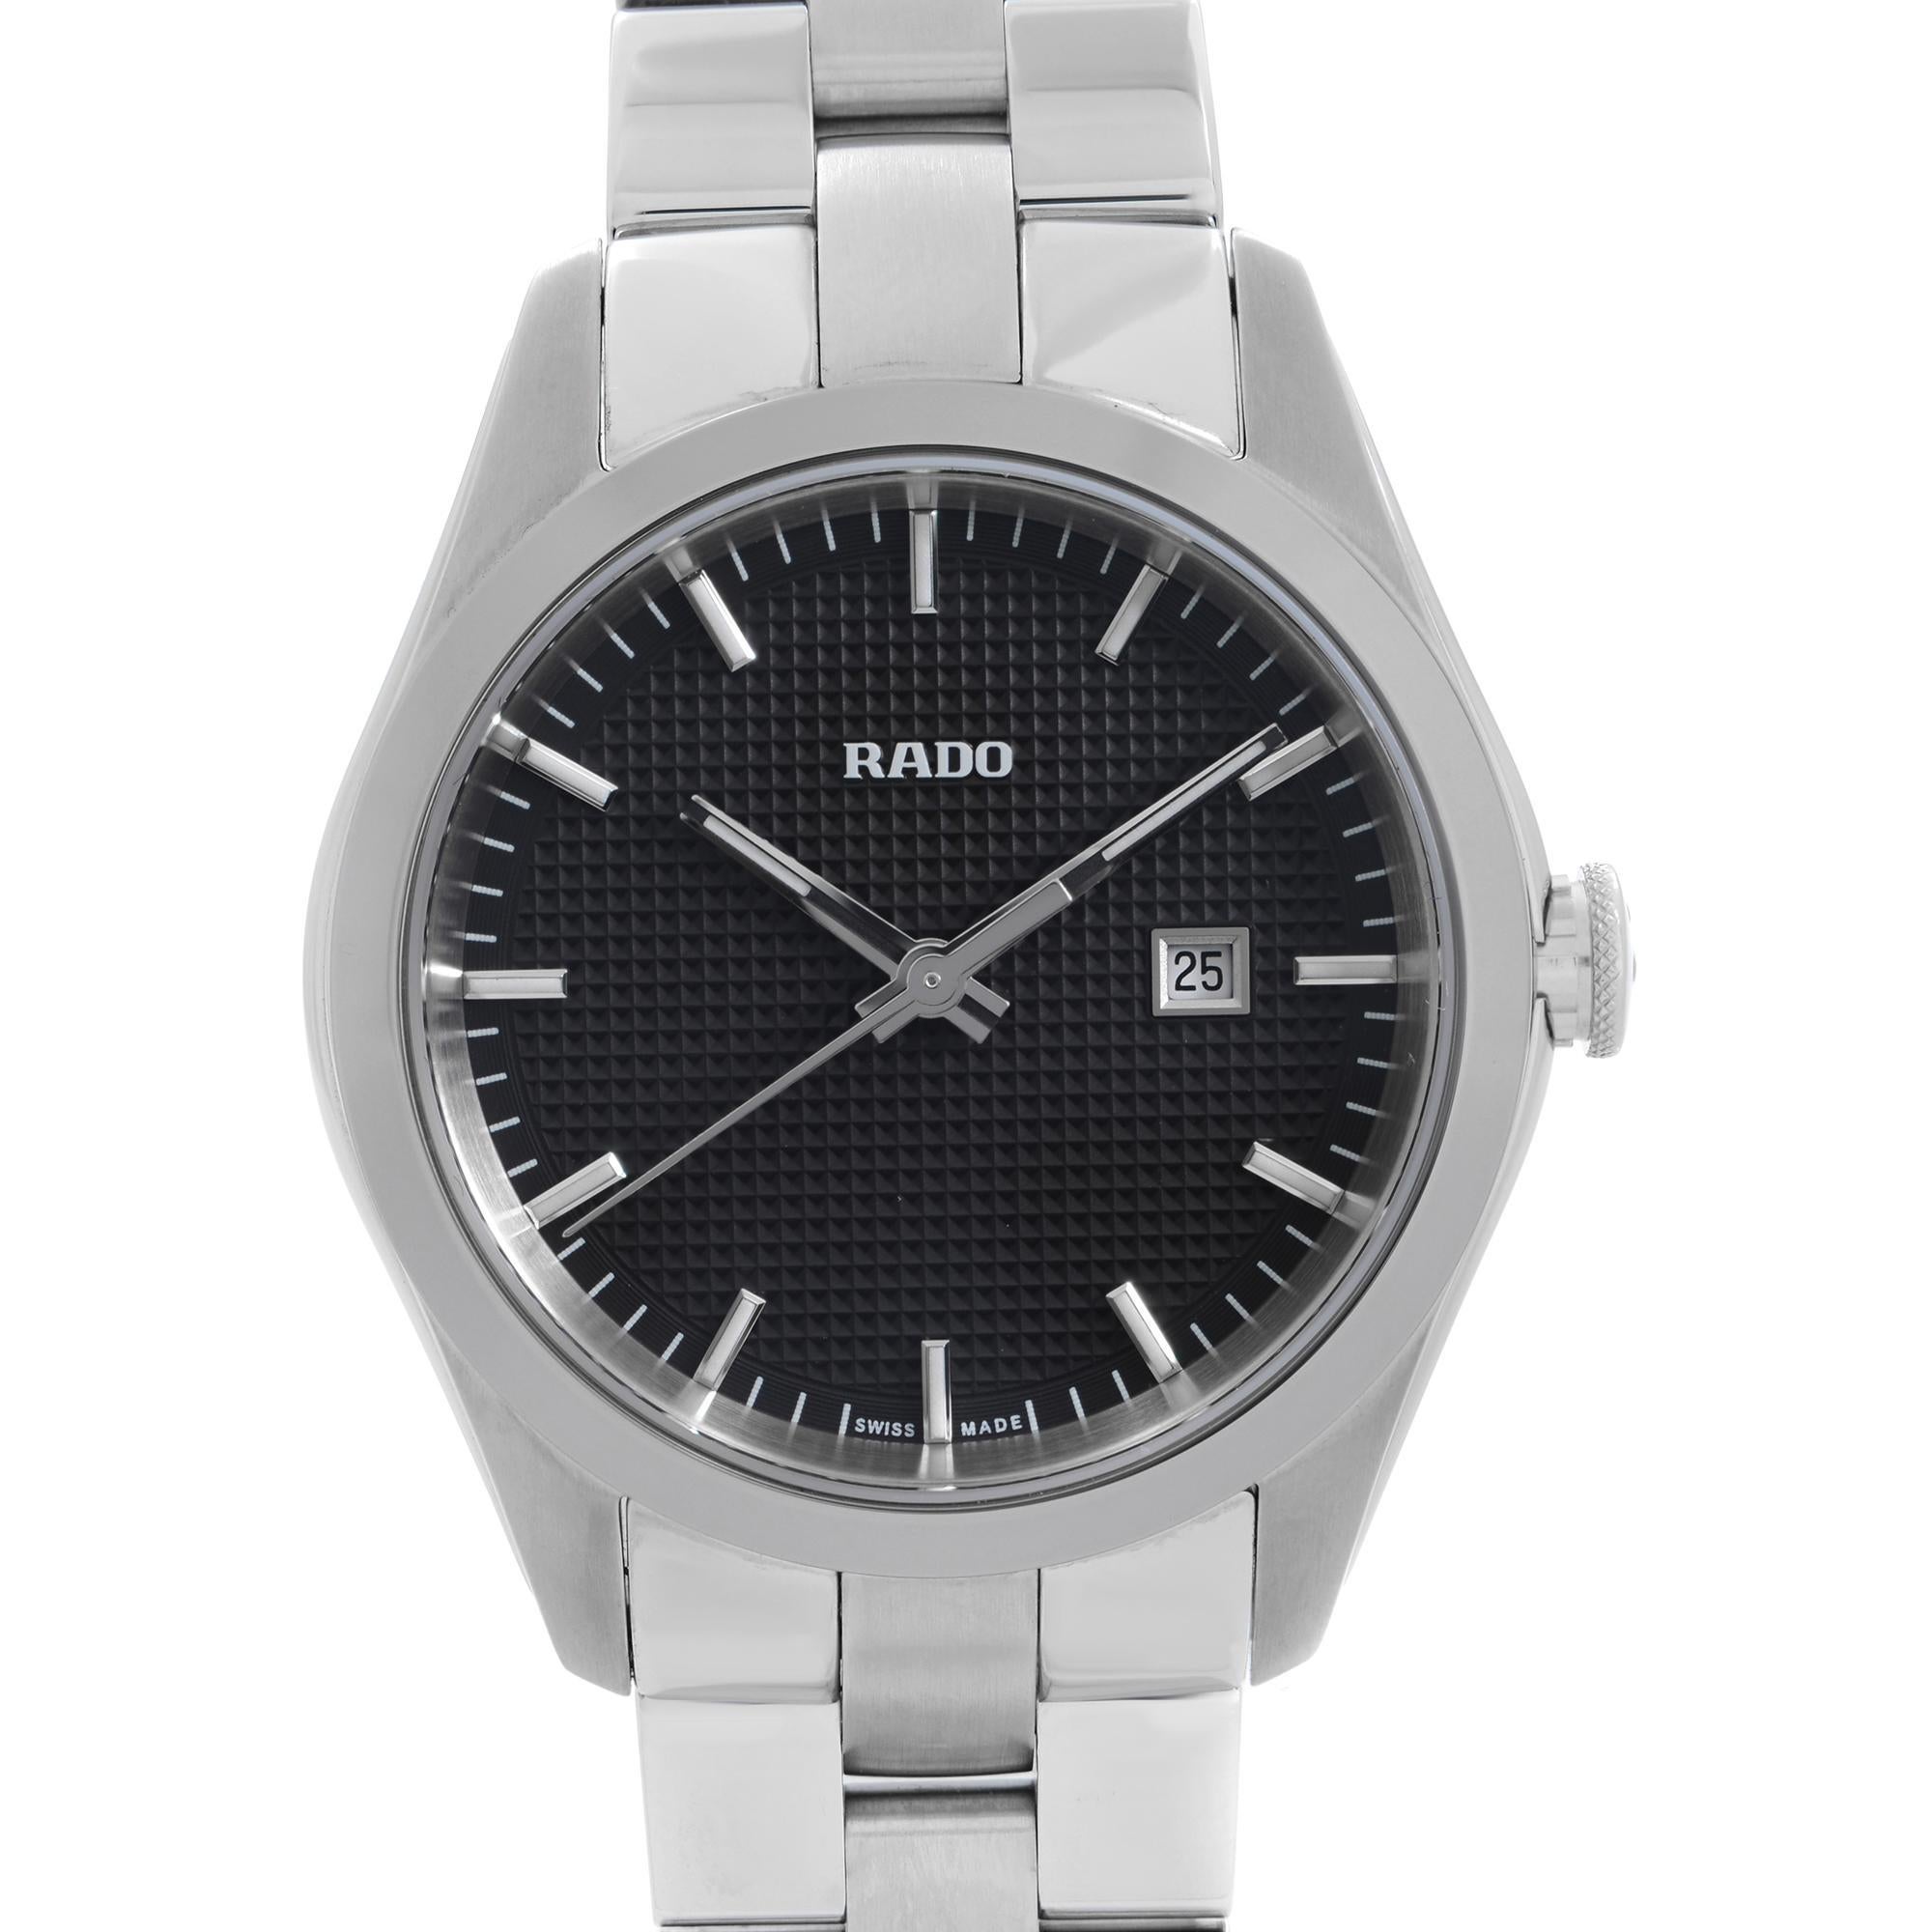 Display Model Rado Hyperchrome 31mm Ceramic Steel Black Dial Ladies Quartz Watch R32110163. This Beautiful Timepiece is Powered By a Quartz Movement and Features: Stainless Steel Case with a Steel and Ceramic Bracelet, Fixed Steel Bezel, Black Dial